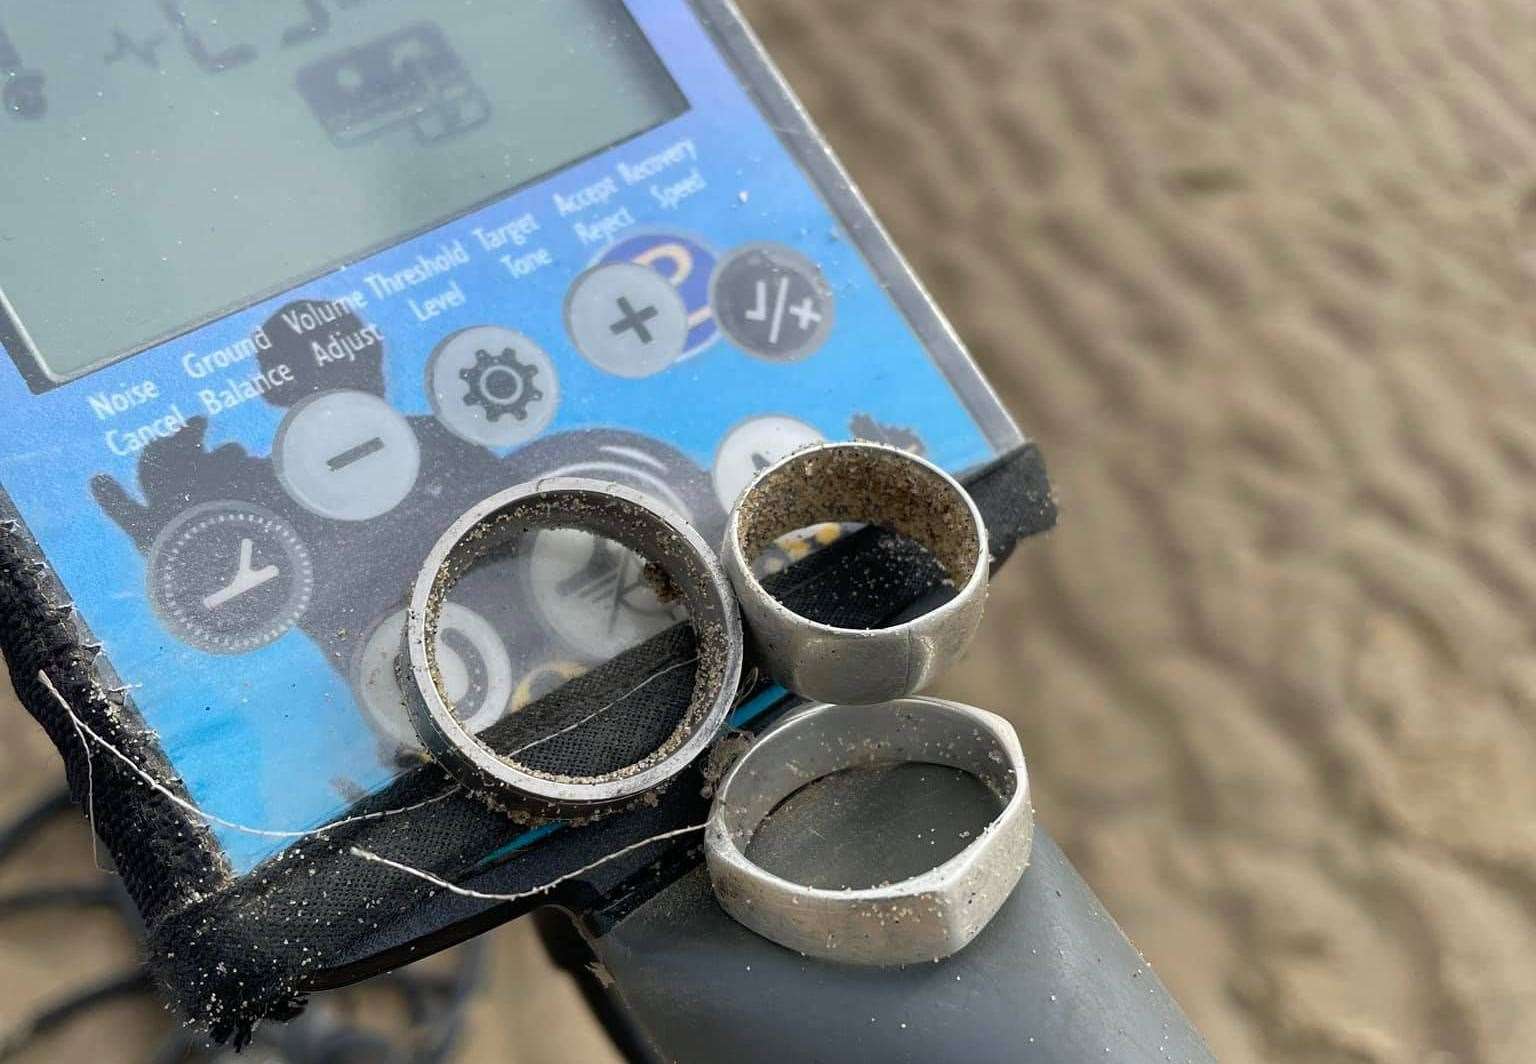 Brendan Sansom has unearthed many rings with his detector on beaches in the Folkestone district